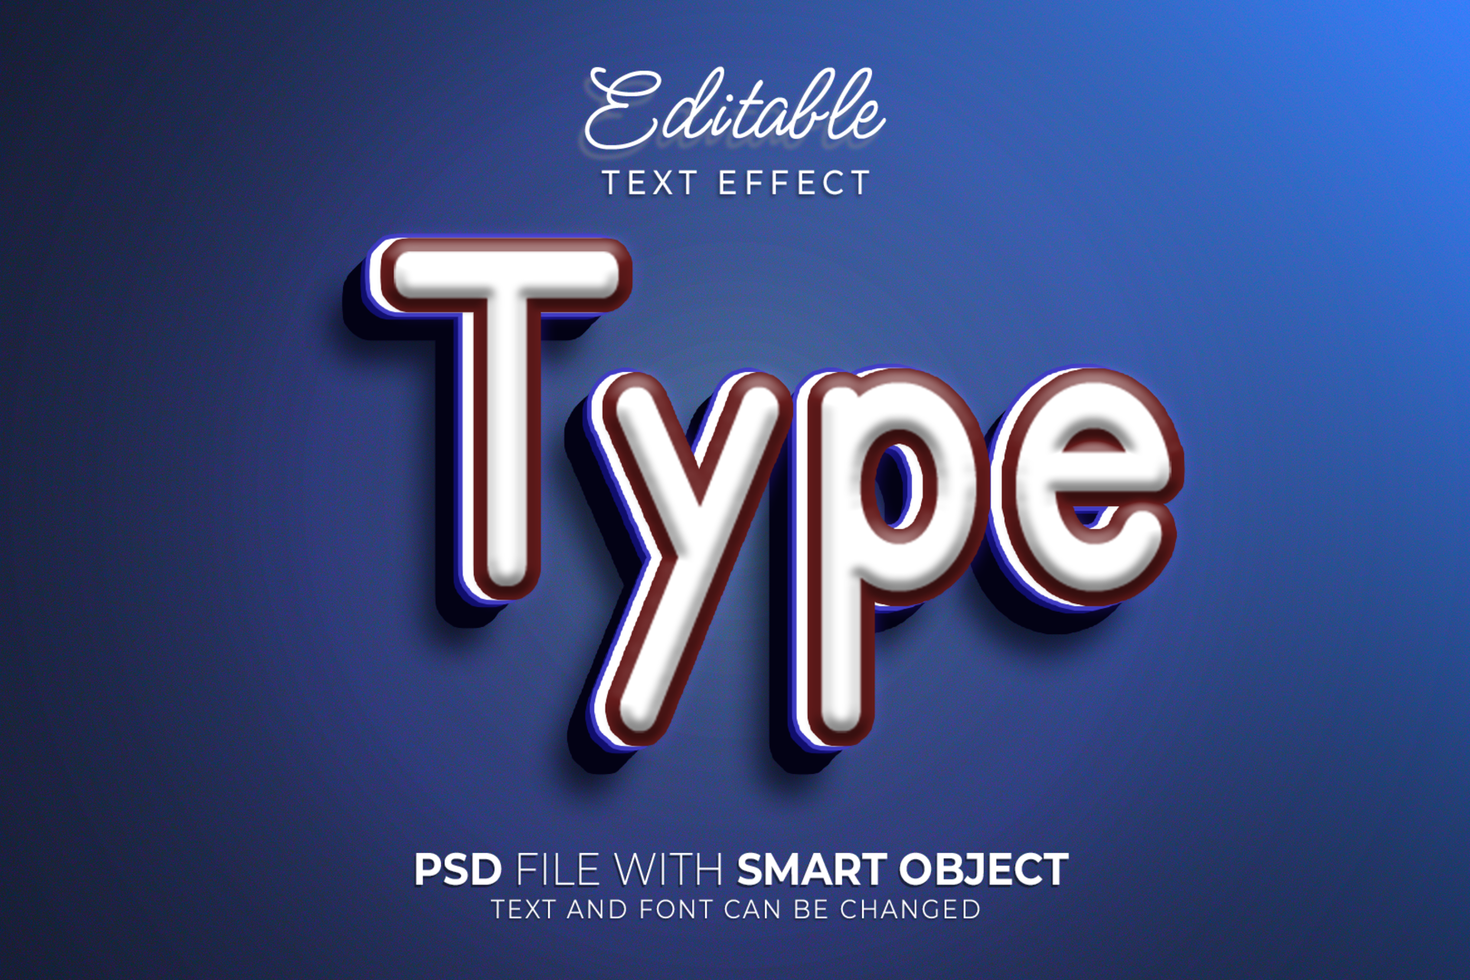 Typo text simple editable text effect psd